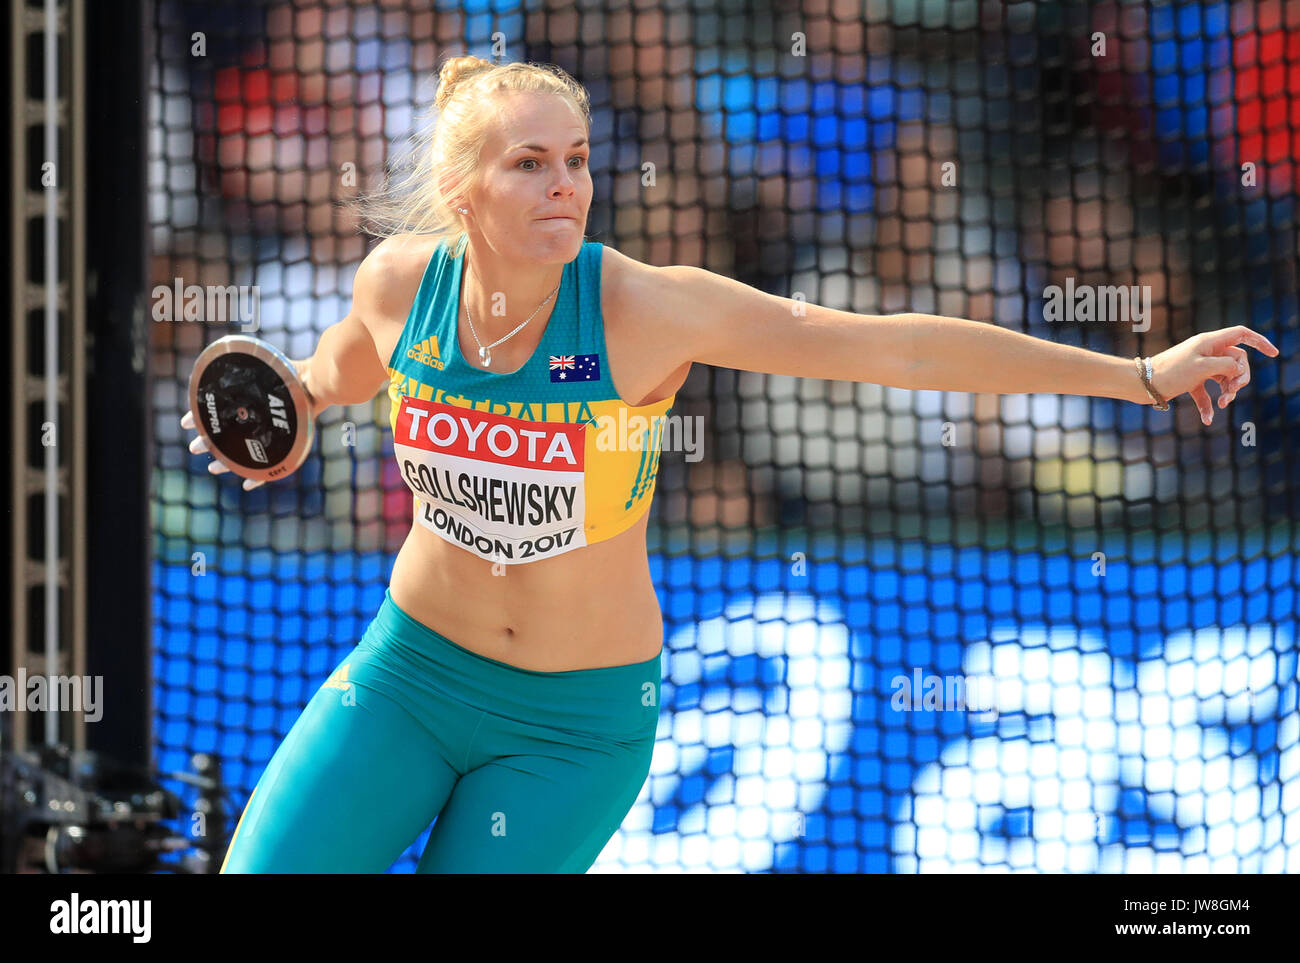 Australia's Taryn Gollshewsky competes in the Women's Discus Throw Qualifying during day eight of the 2017 IAAF World Championships at the London Stadium Stock Photo